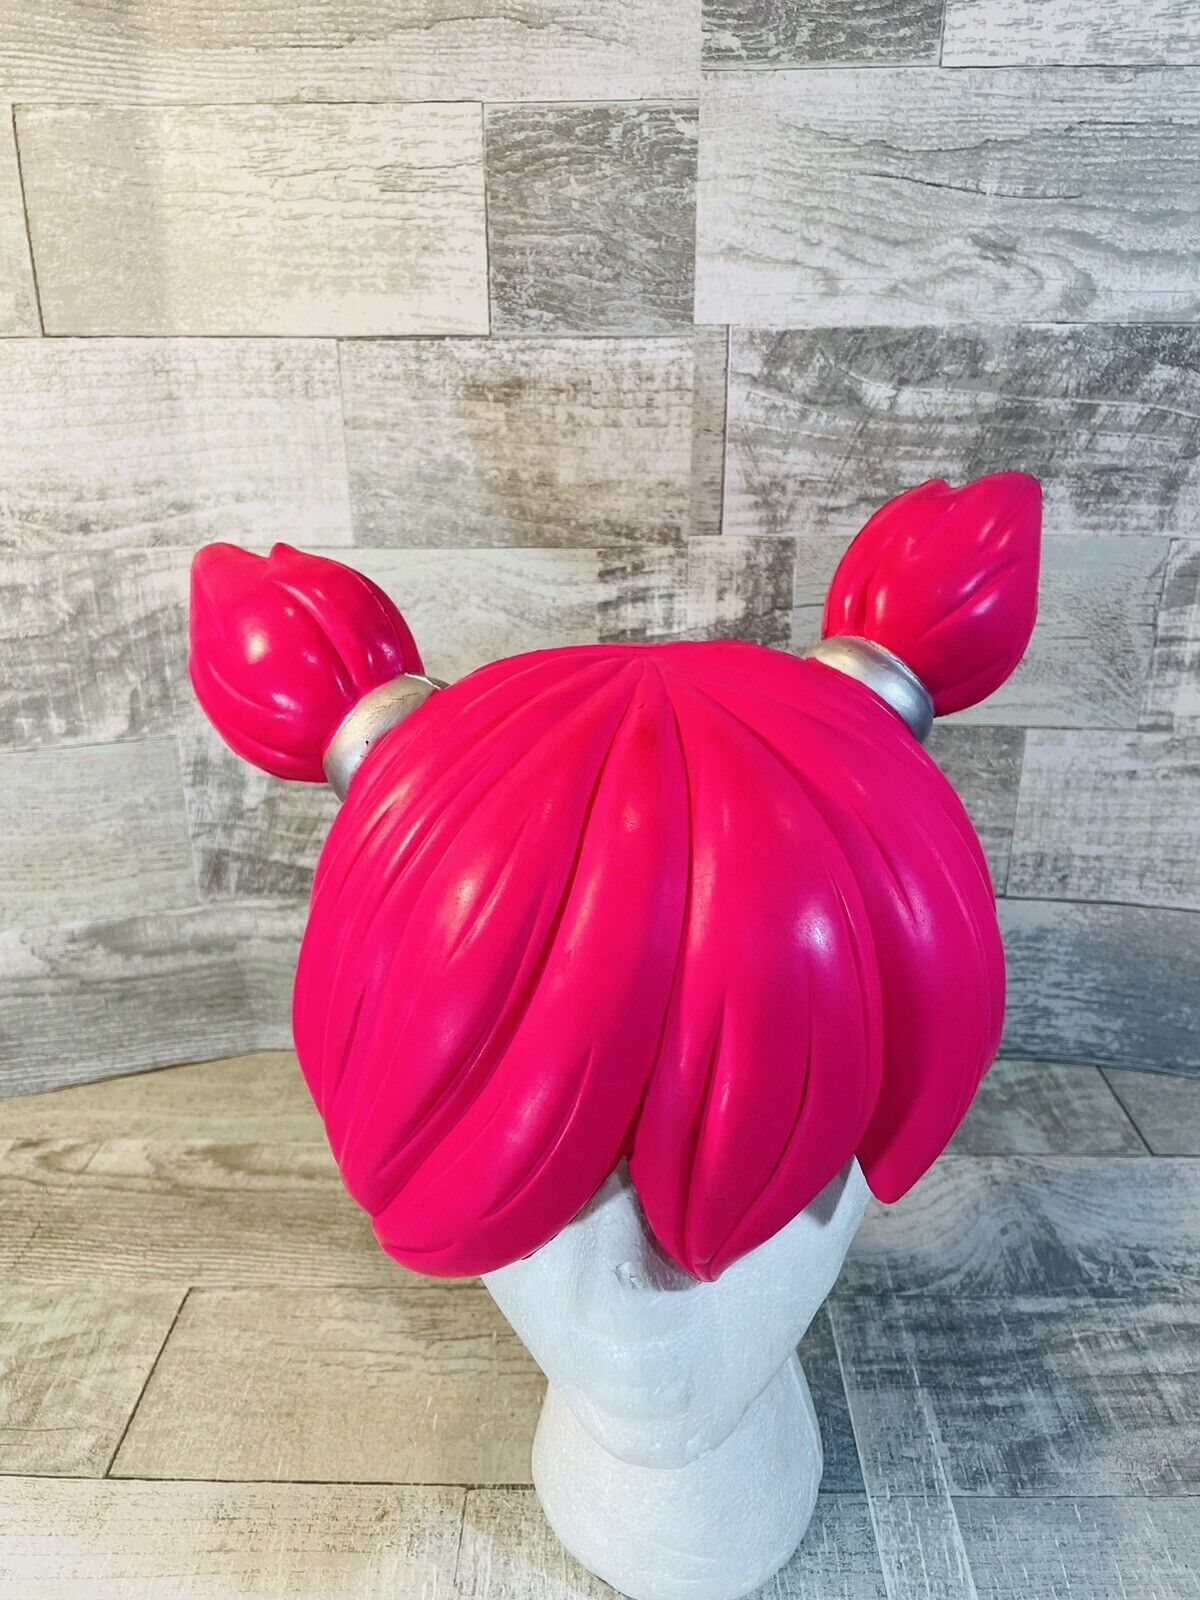 Toy Quest 2005 Hot Pink Wig Hair Ponytail Anime Manga Comic Costume Cosplay Foam